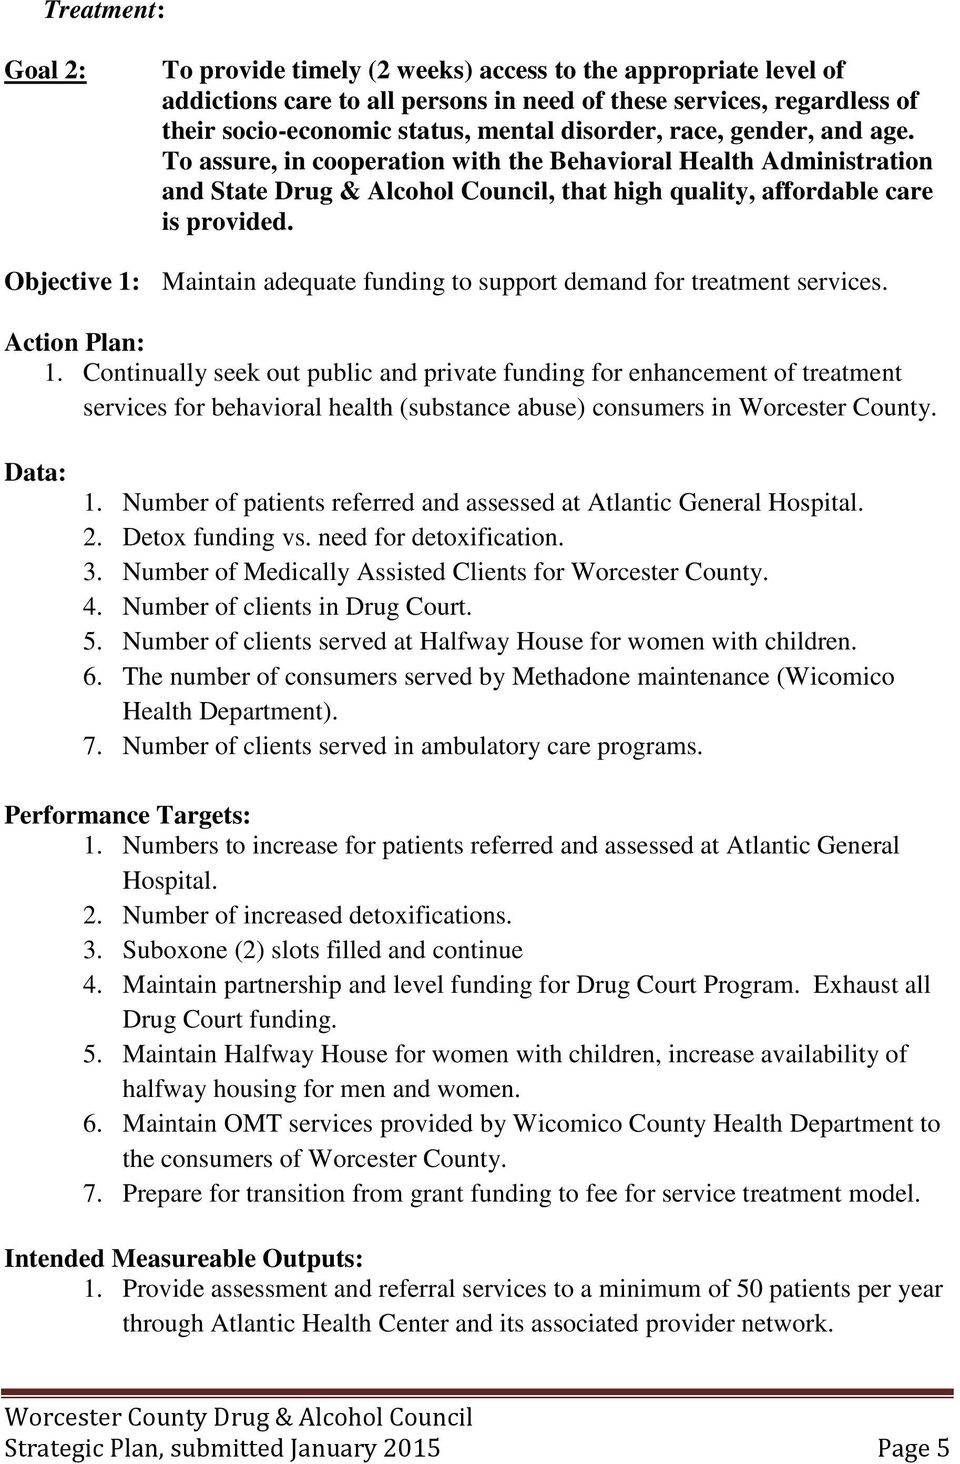 Objective 1: Maintain adequate funding to support demand for treatment services. 1. Continually seek out public and private funding for enhancement of treatment services for behavioral health (substance abuse) consumers in Worcester County.